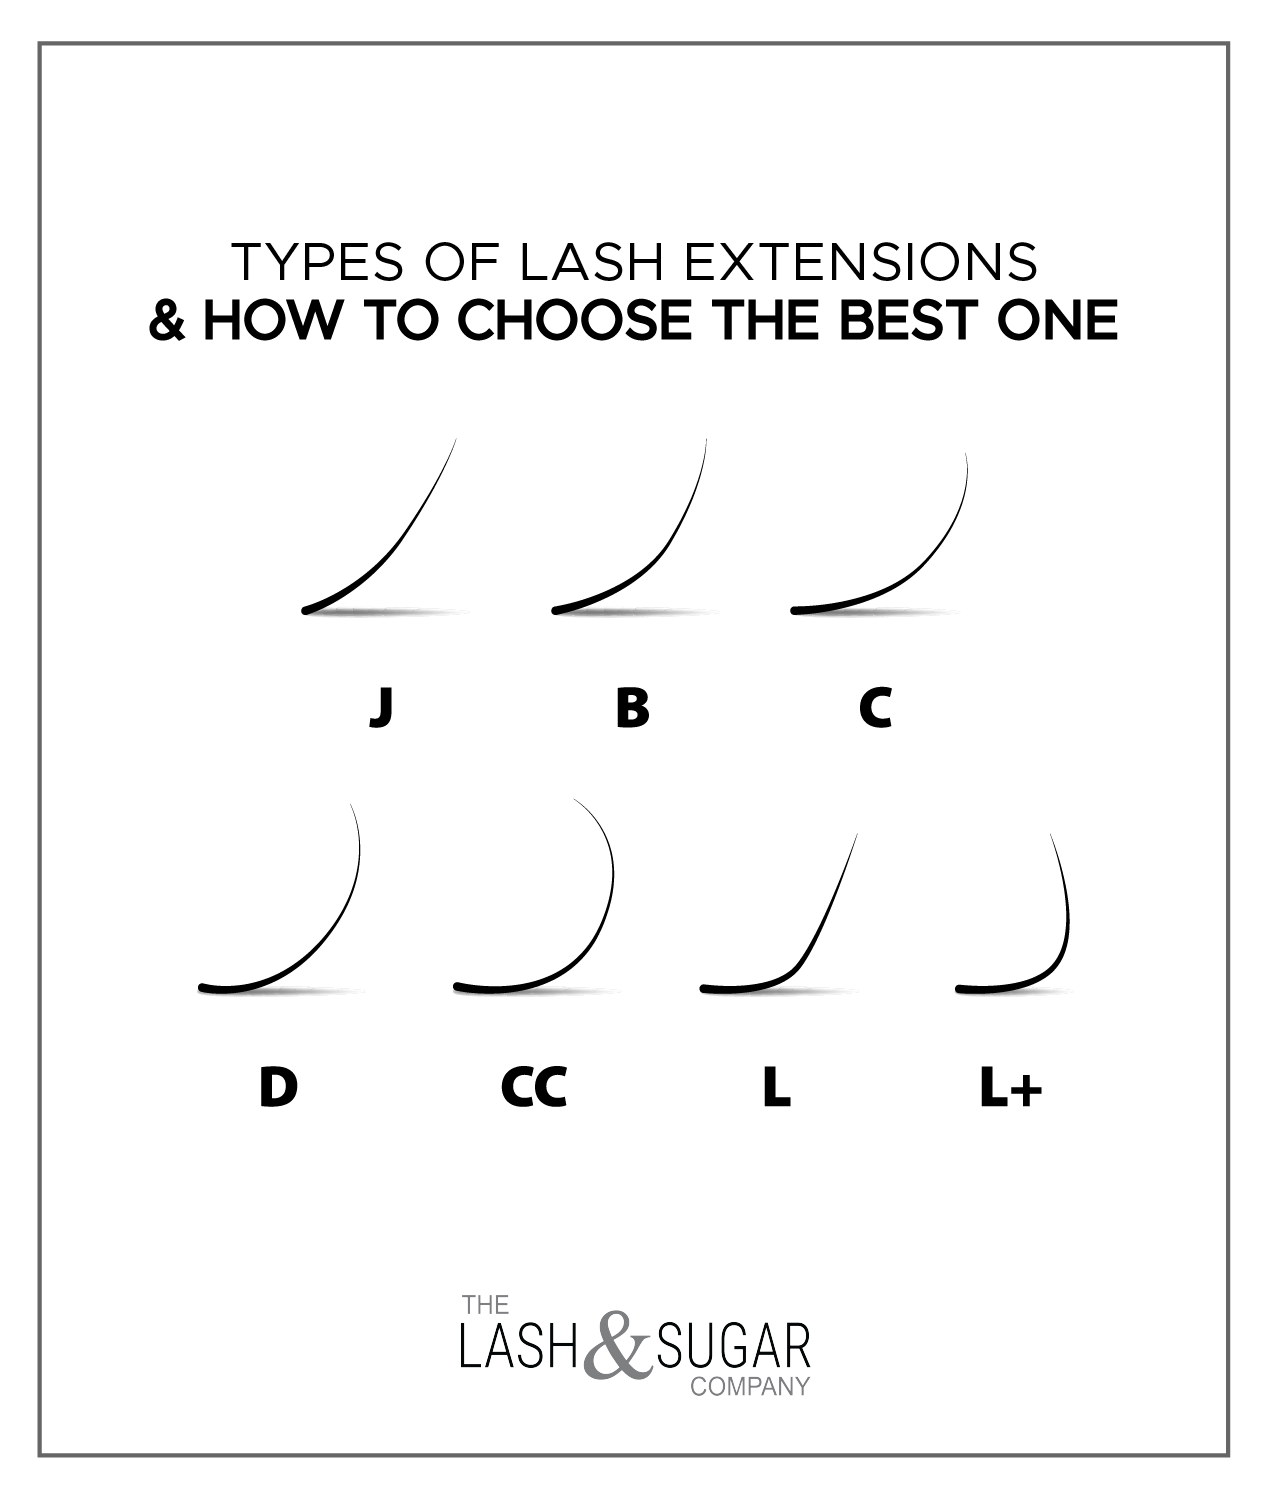 types-of-lash-extensions-how-to-choose-the-best-one-lash-sugar-co